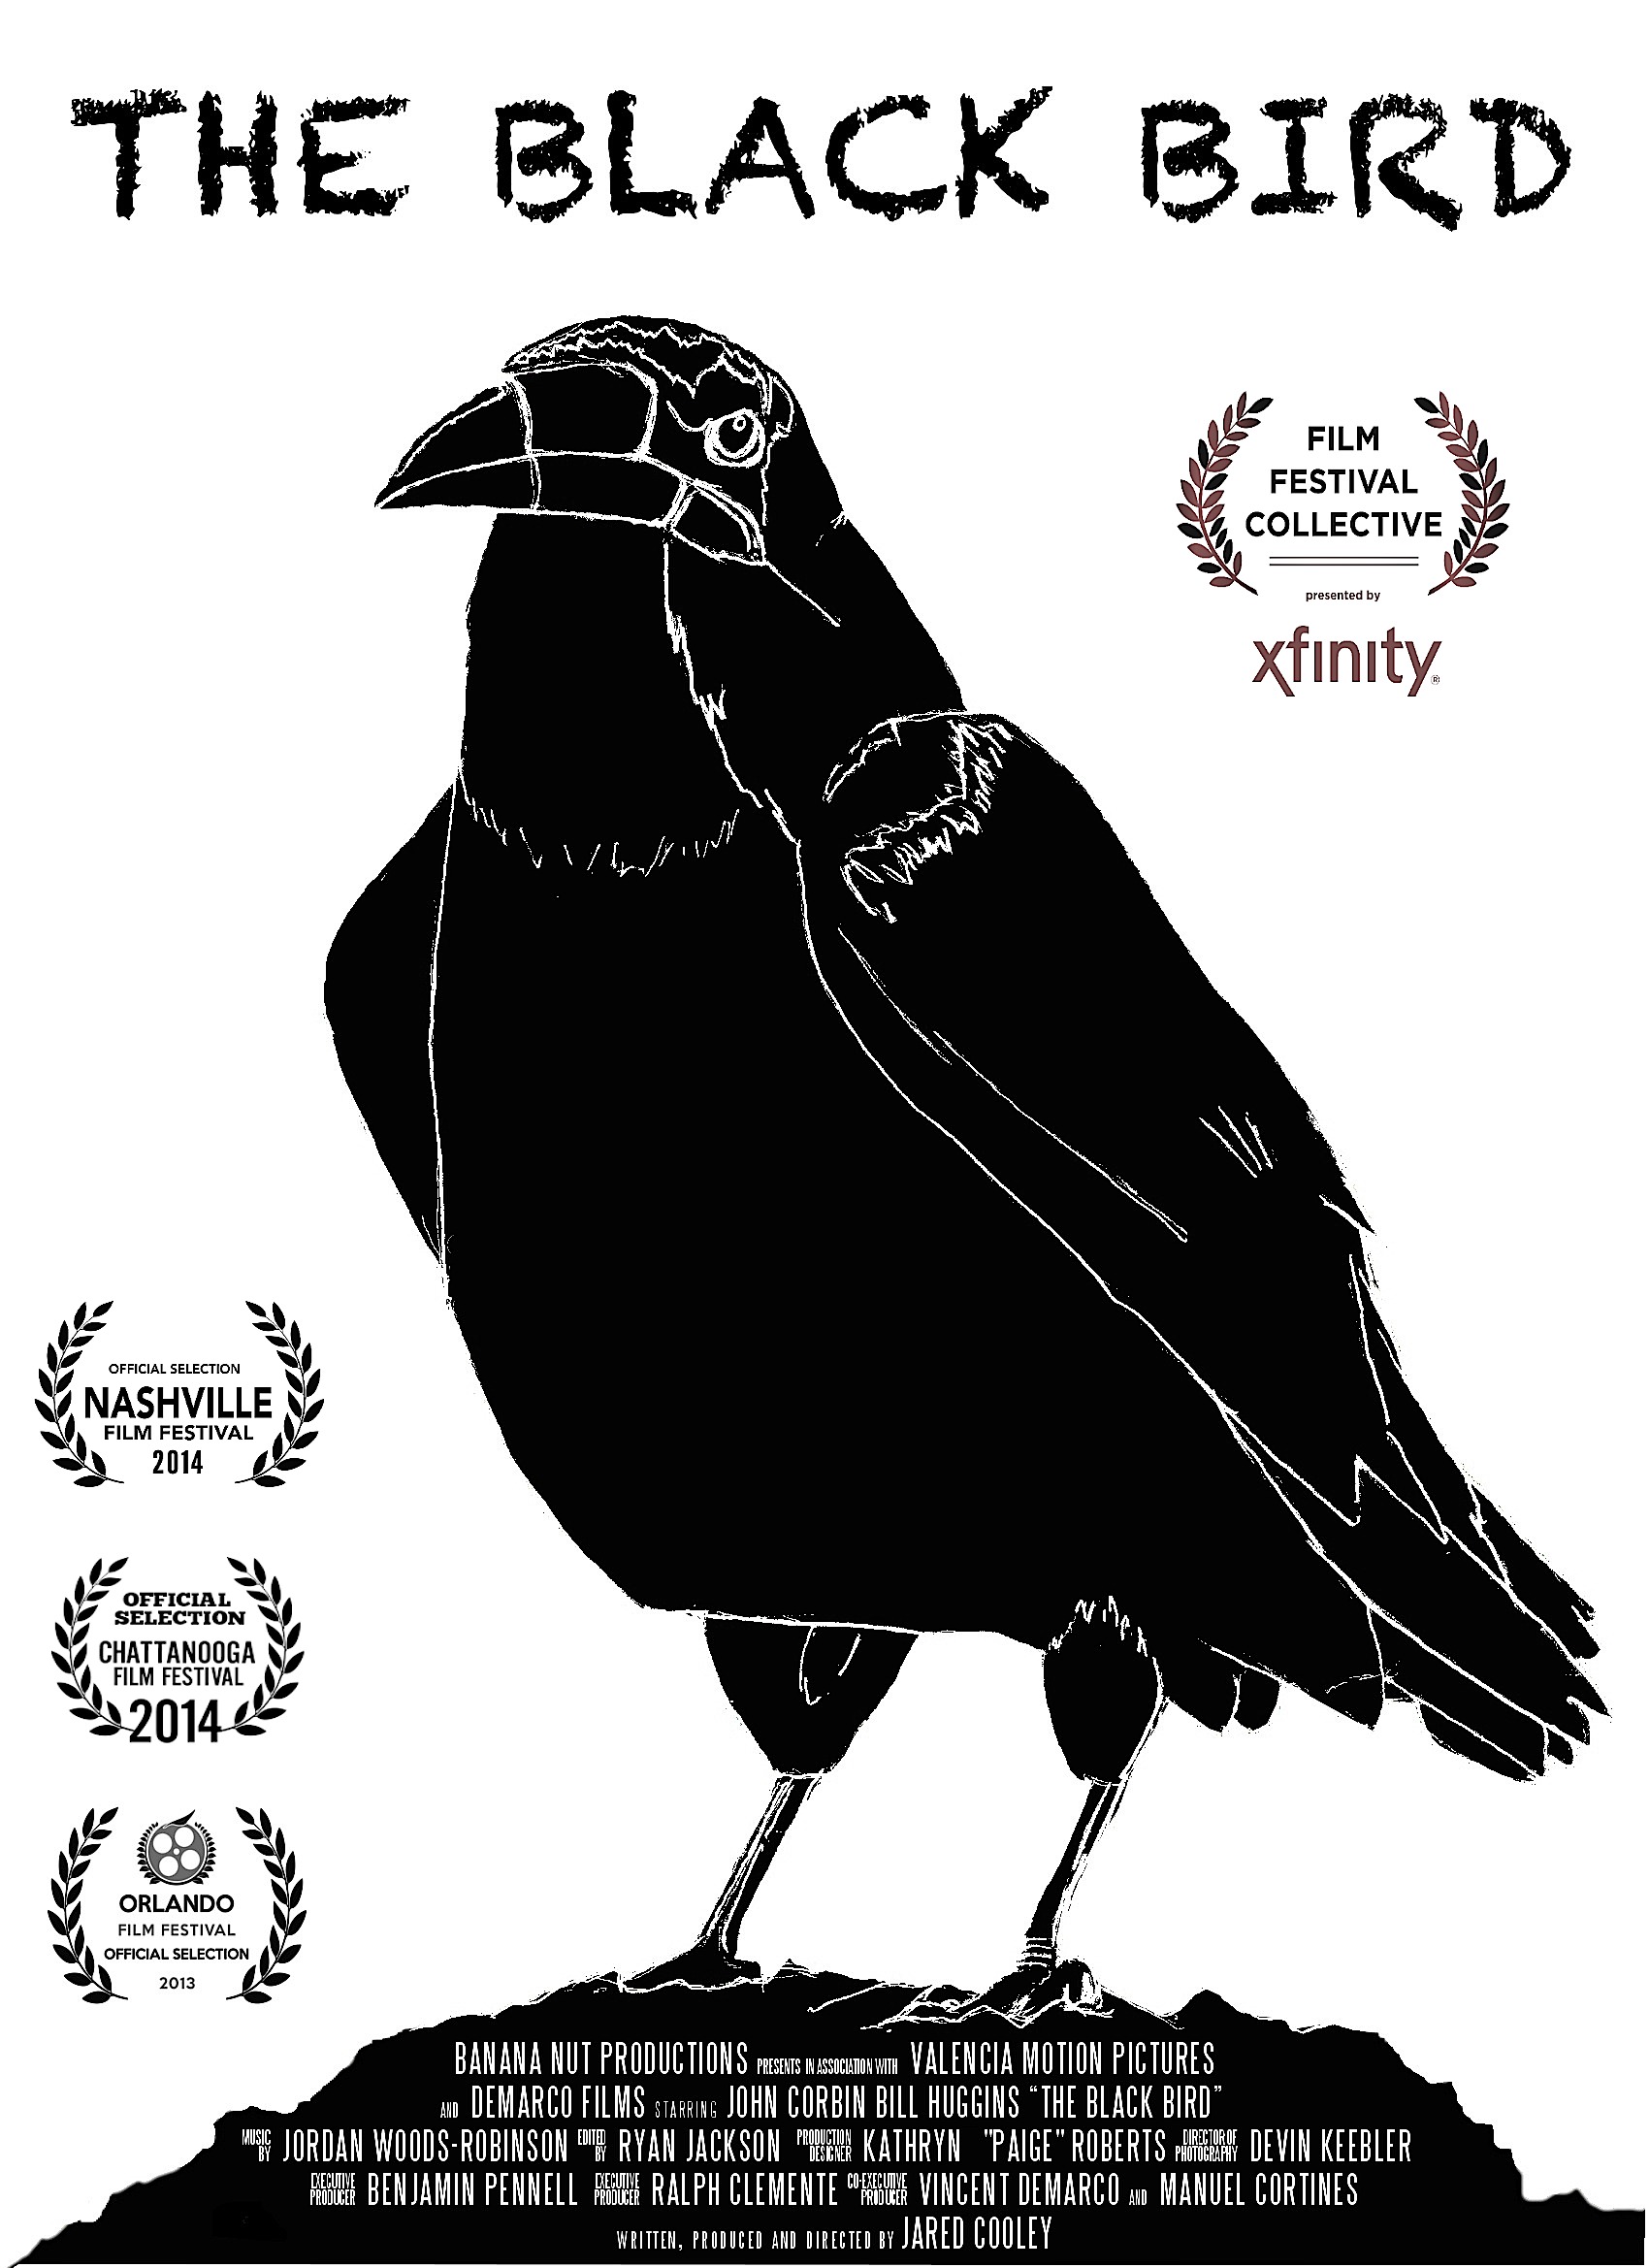 The festival poster for The Black Bird (2013) directed by Jared Cooley.